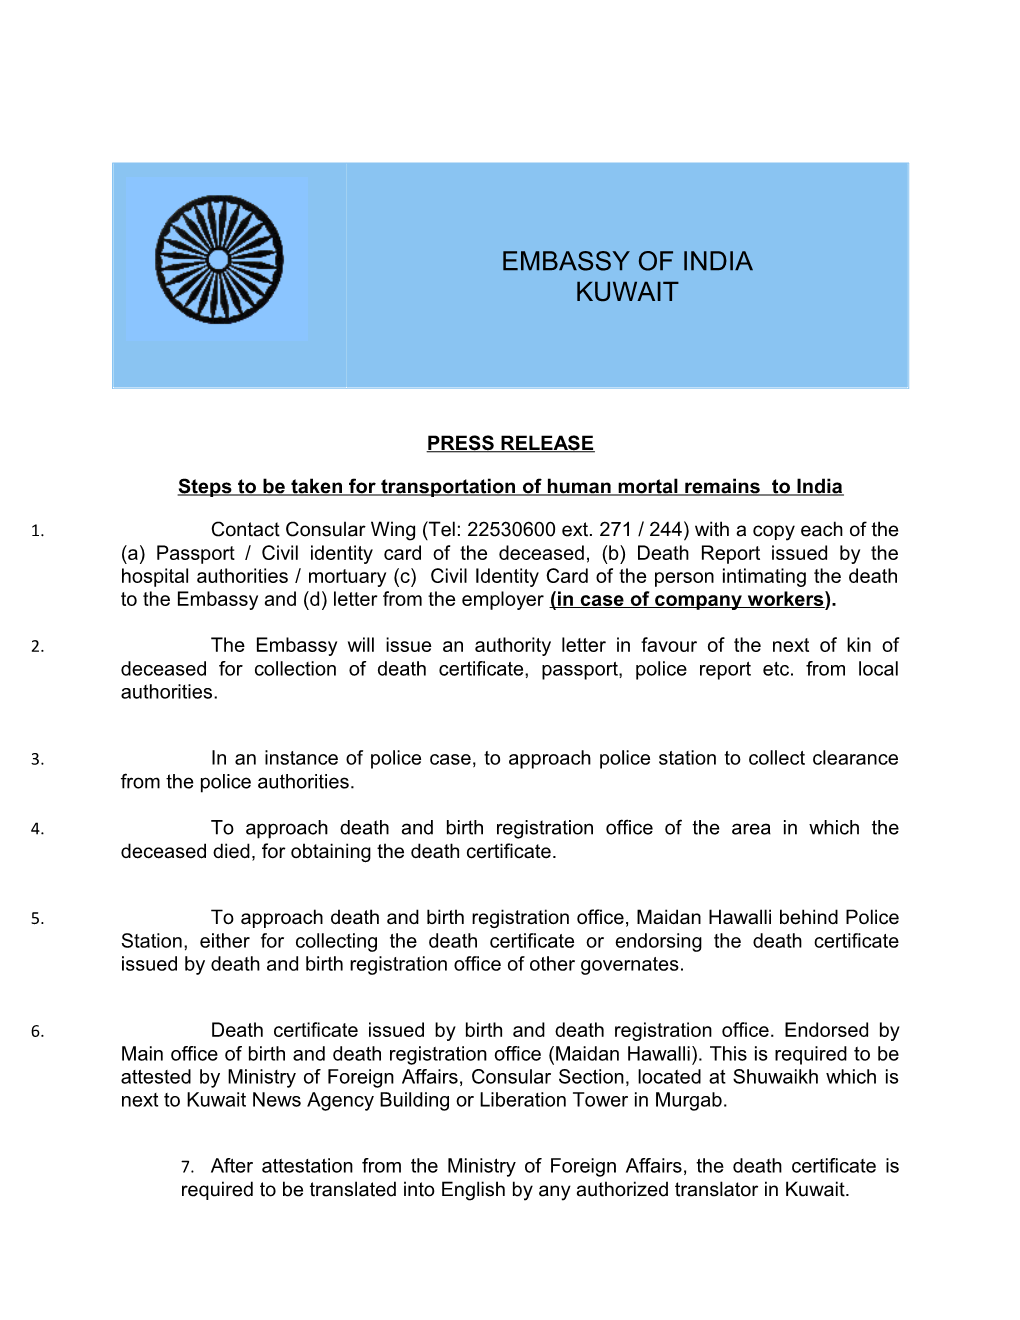 Steps to Be Taken for Transportation of Human Mortal Remains to India